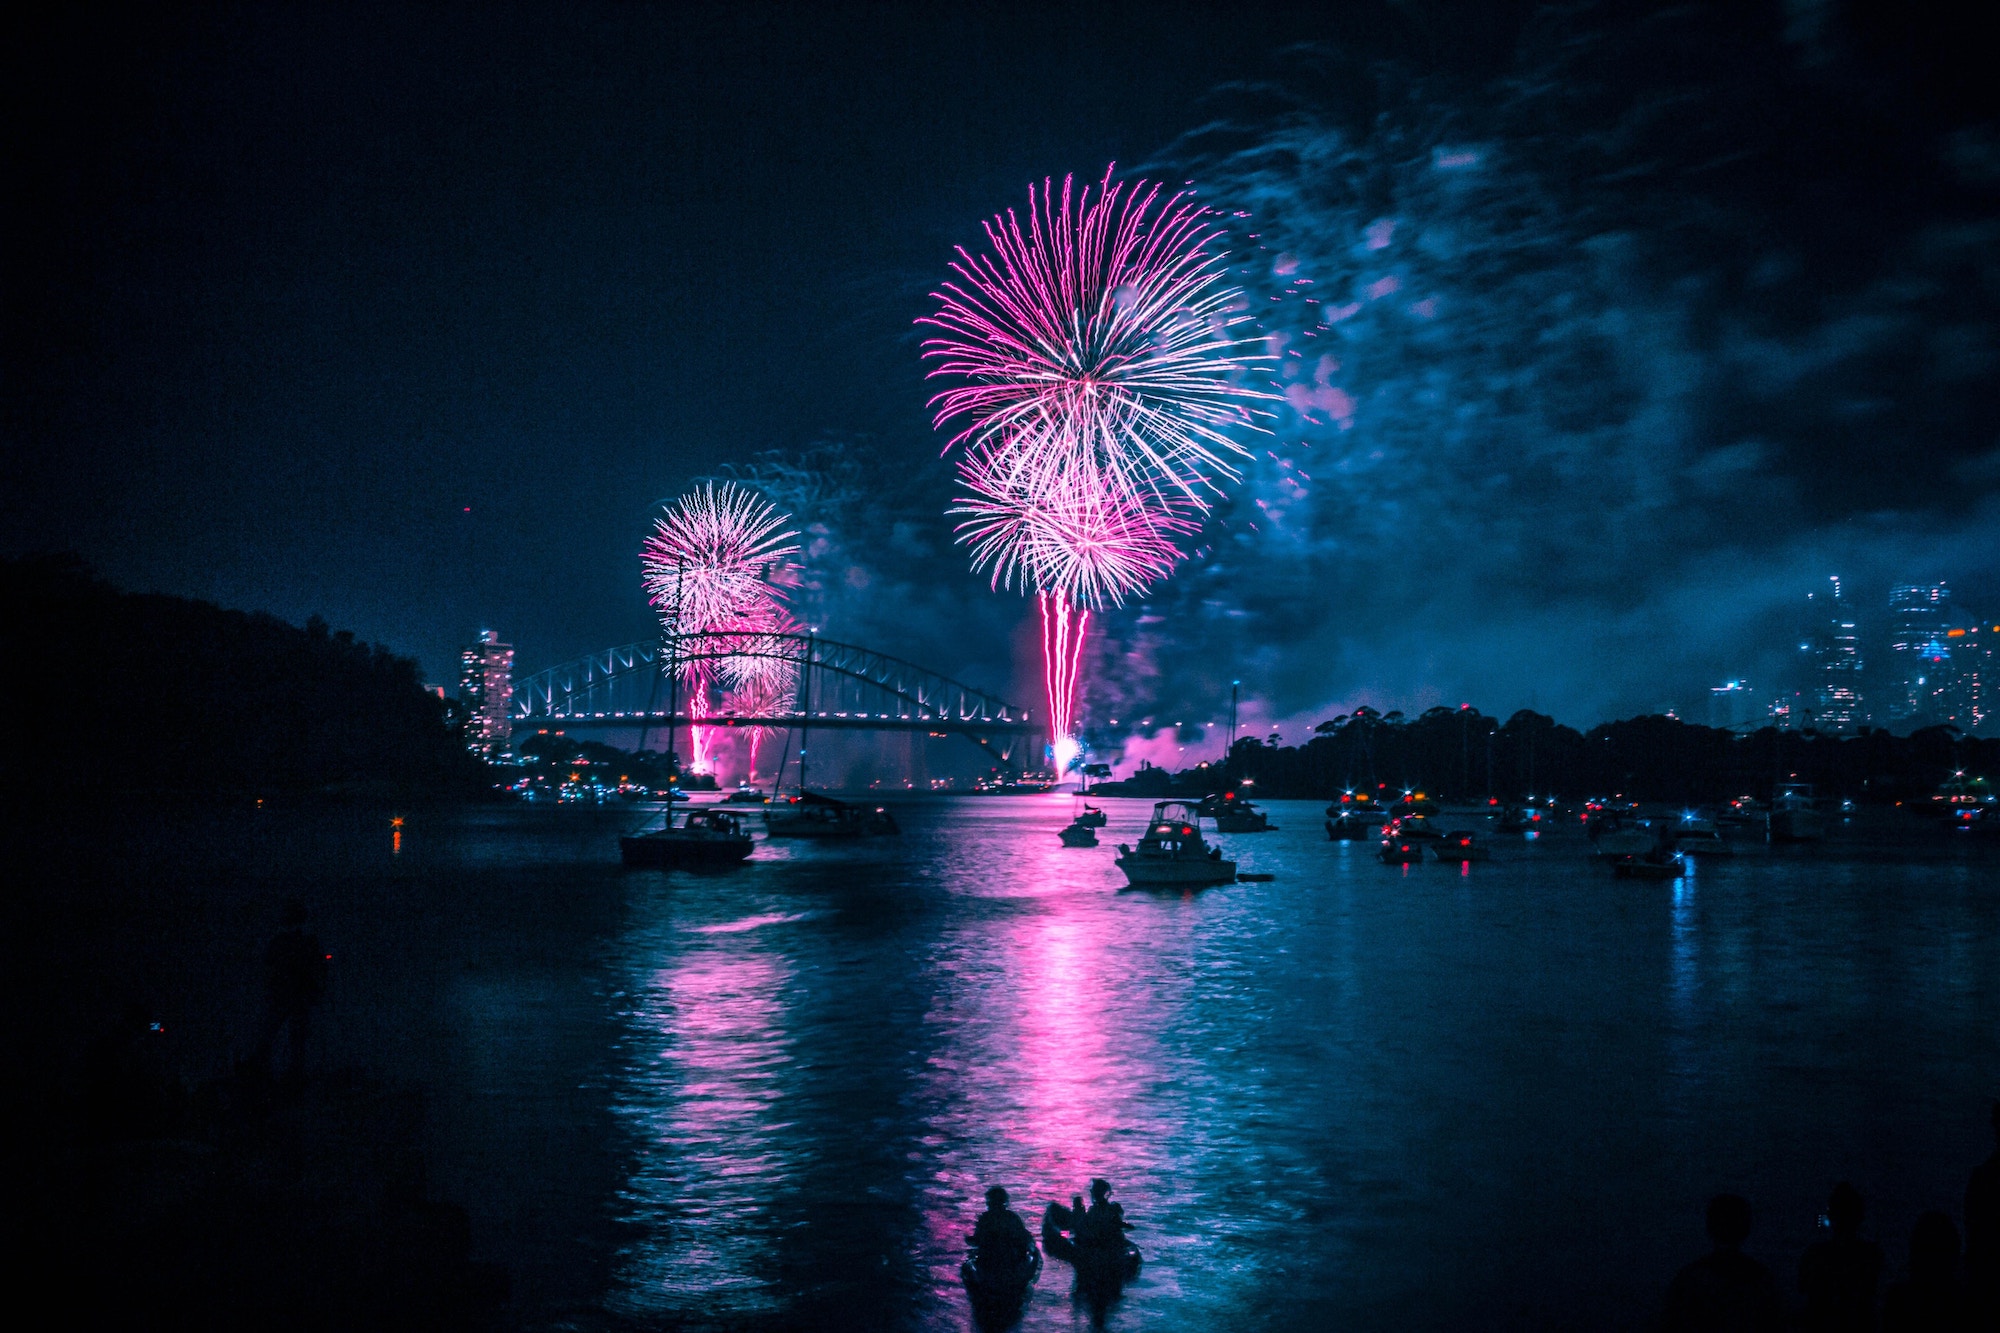 Pink and white fireworks above a dark blue city scene, rivers on a boat are shown in the foreground